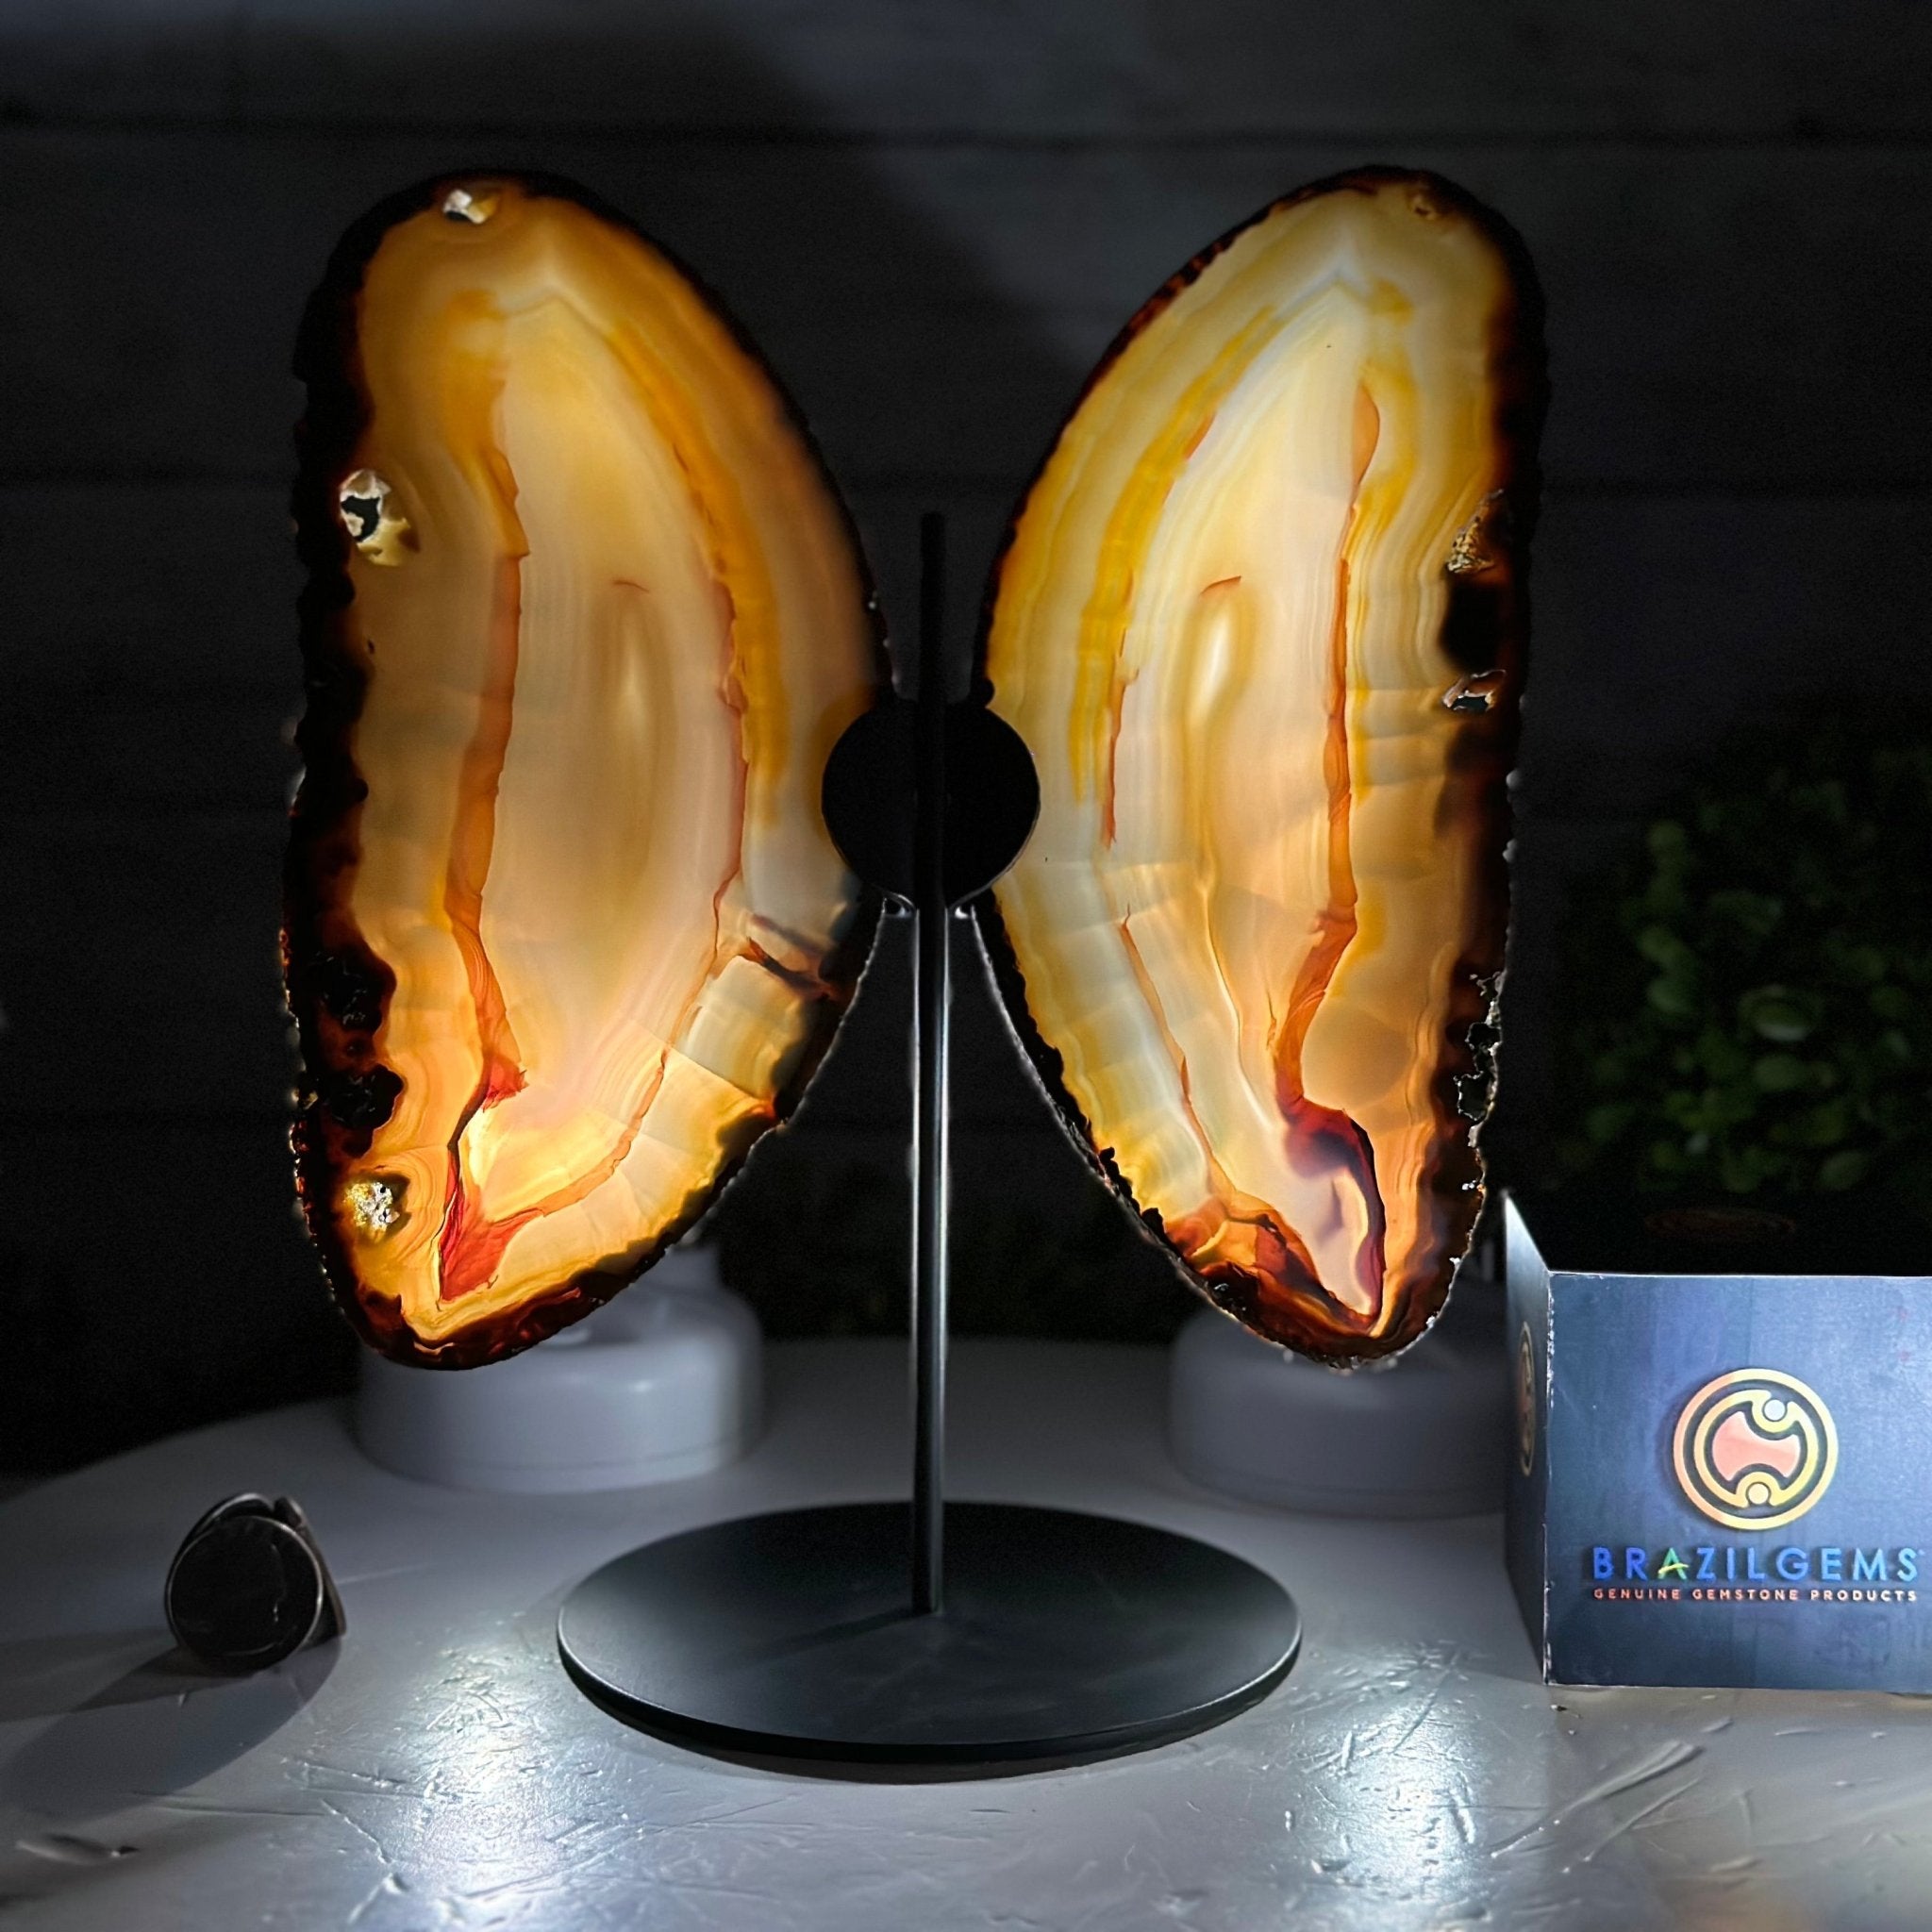 Natural Brazilian Agate "Butterfly Wings", 9.6" Tall #5050NA-105 - Brazil GemsBrazil GemsNatural Brazilian Agate "Butterfly Wings", 9.6" Tall #5050NA-105Agate Butterfly Wings5050NA-105